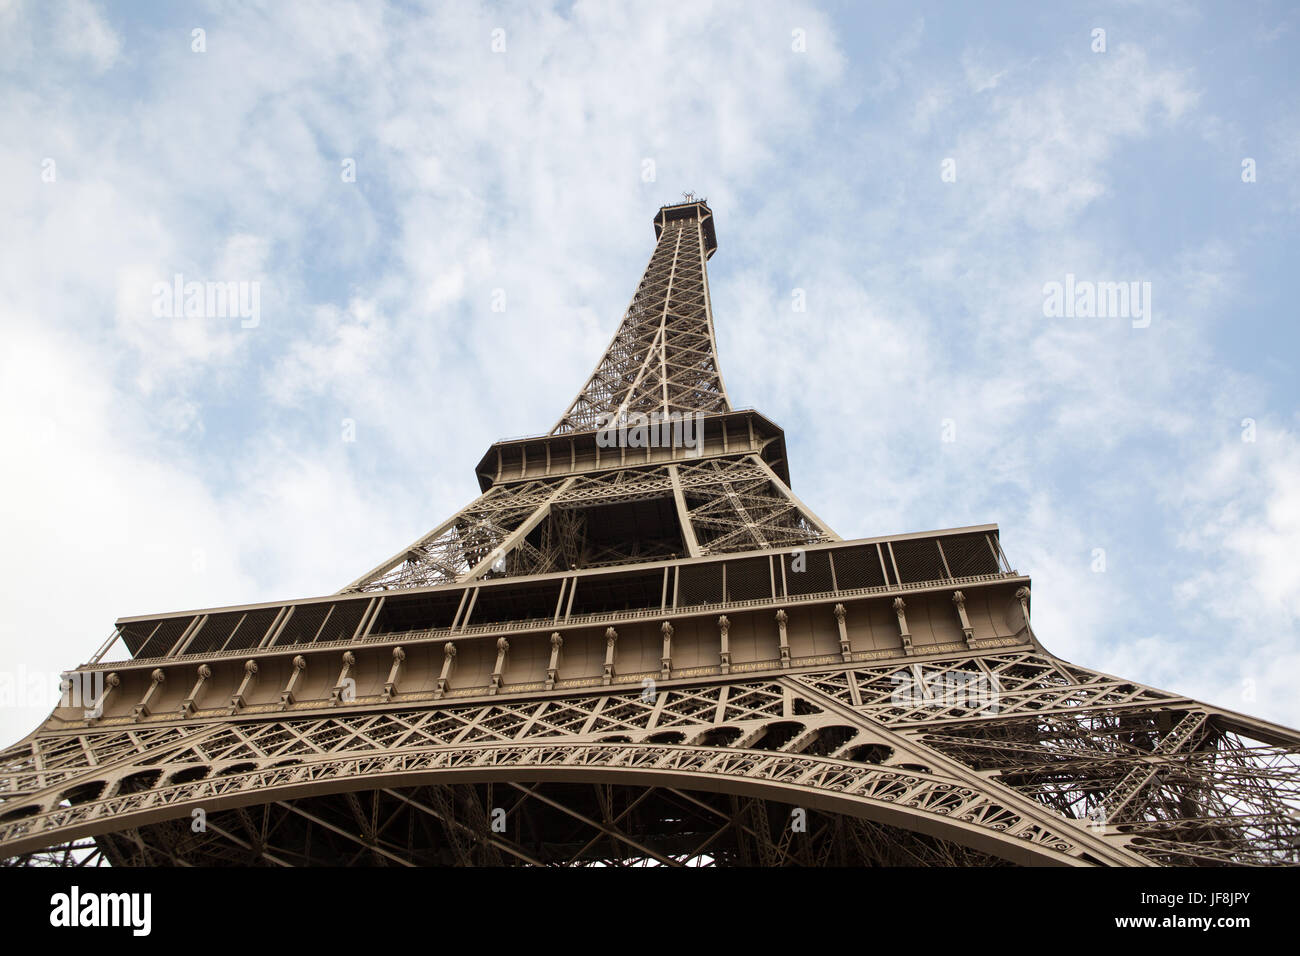 A low angle view of the Eiffel Tower. Stock Photo